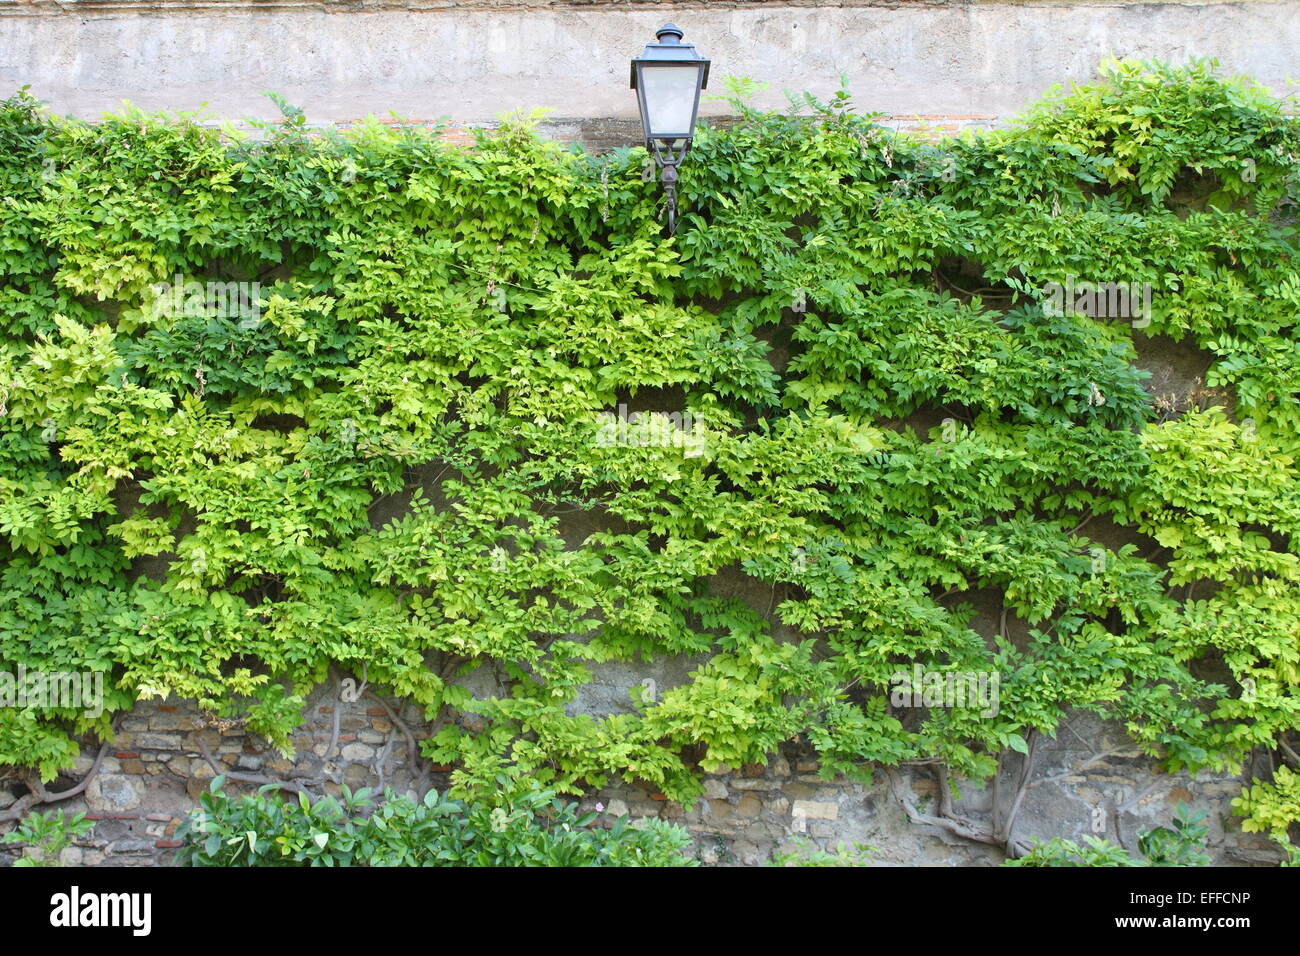 Old medieval street lamp on a wall covered by vegetation Stock Photo